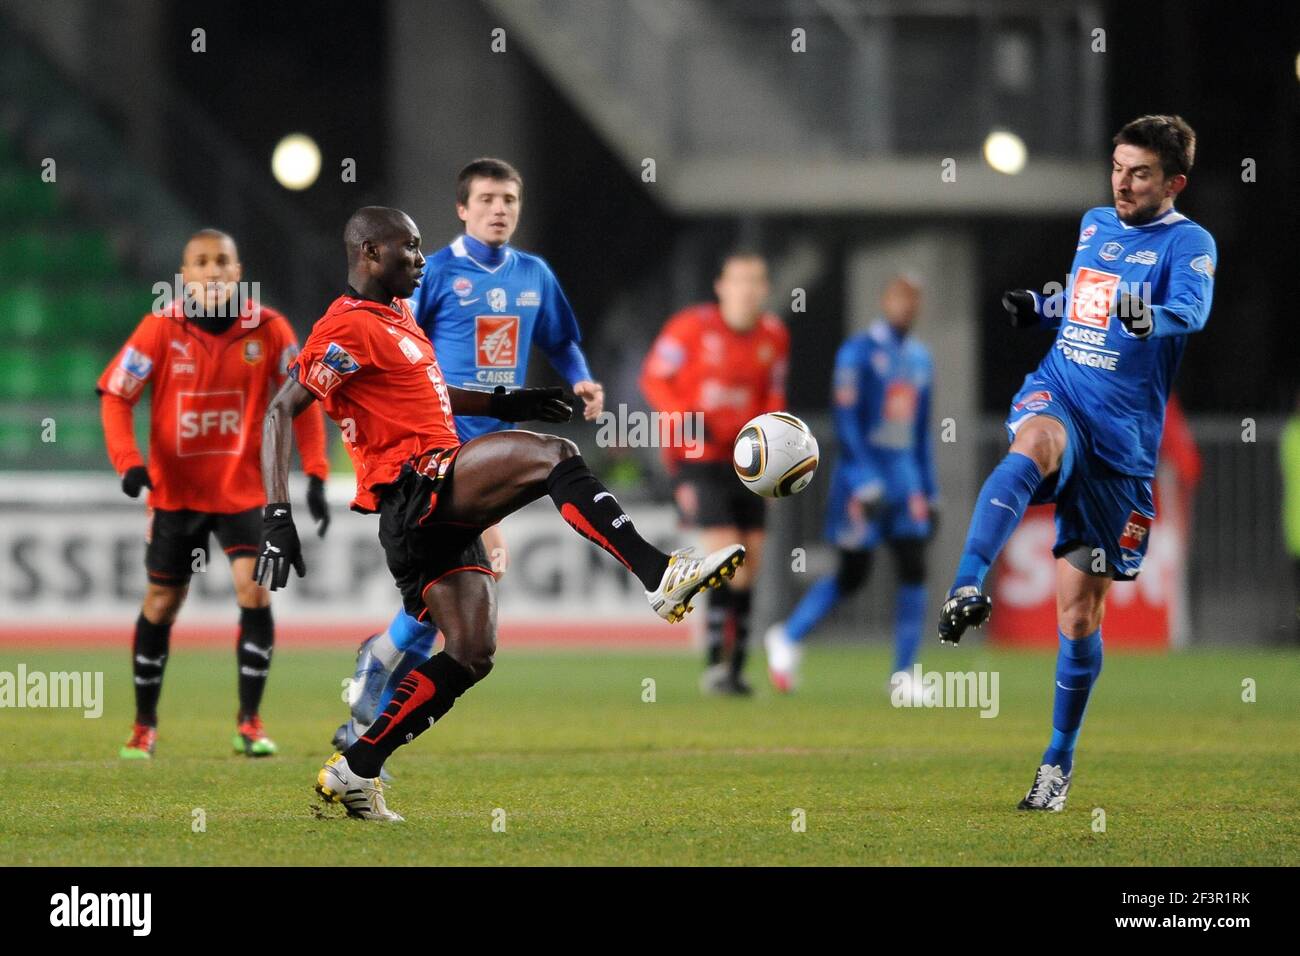 FOOTBALL - FOOT - FRENCH CUP - 2009/2010 - 100109 - RENNES v CAEN - PHOTO PASCAL ALLEE / DPPI -ISMAEL BANGOURA (RENNES) / GREGORY LECA (CAEN) Stock Photo